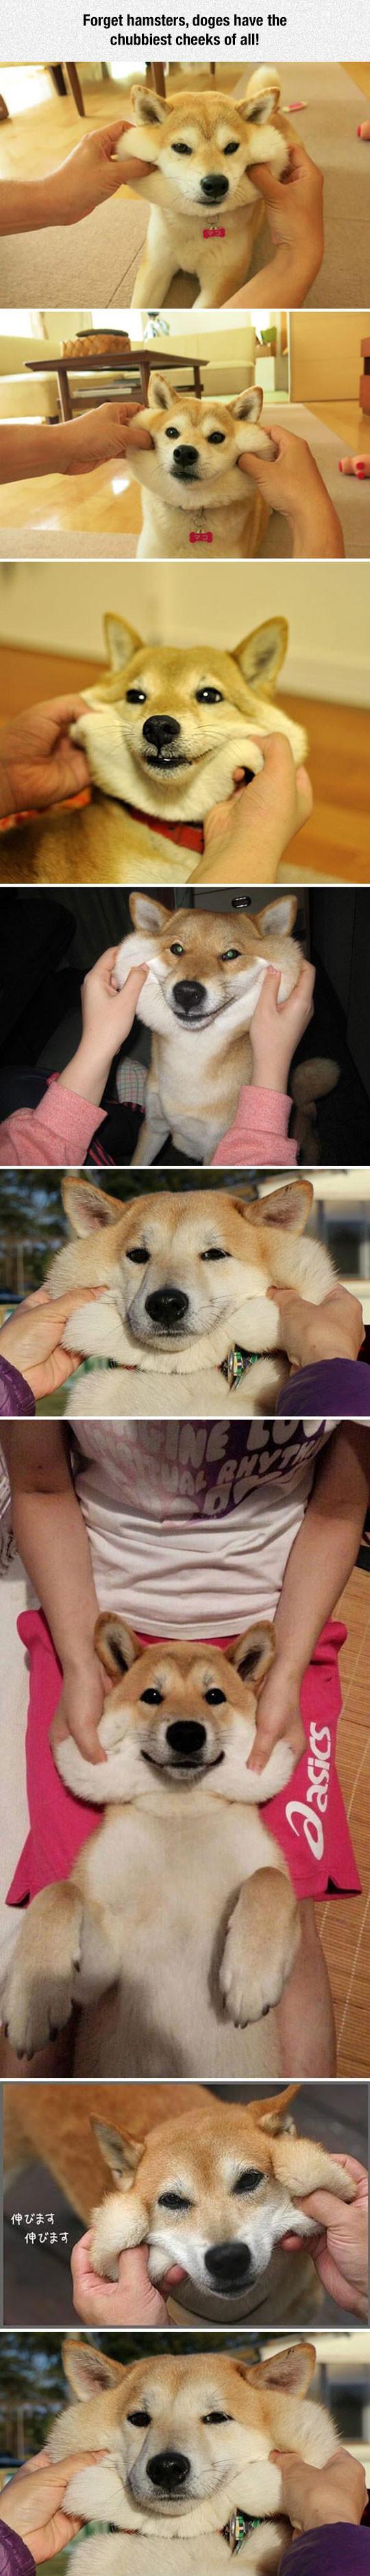 Forget Hamsters, Doges Have The Chubbiest Cheeks..